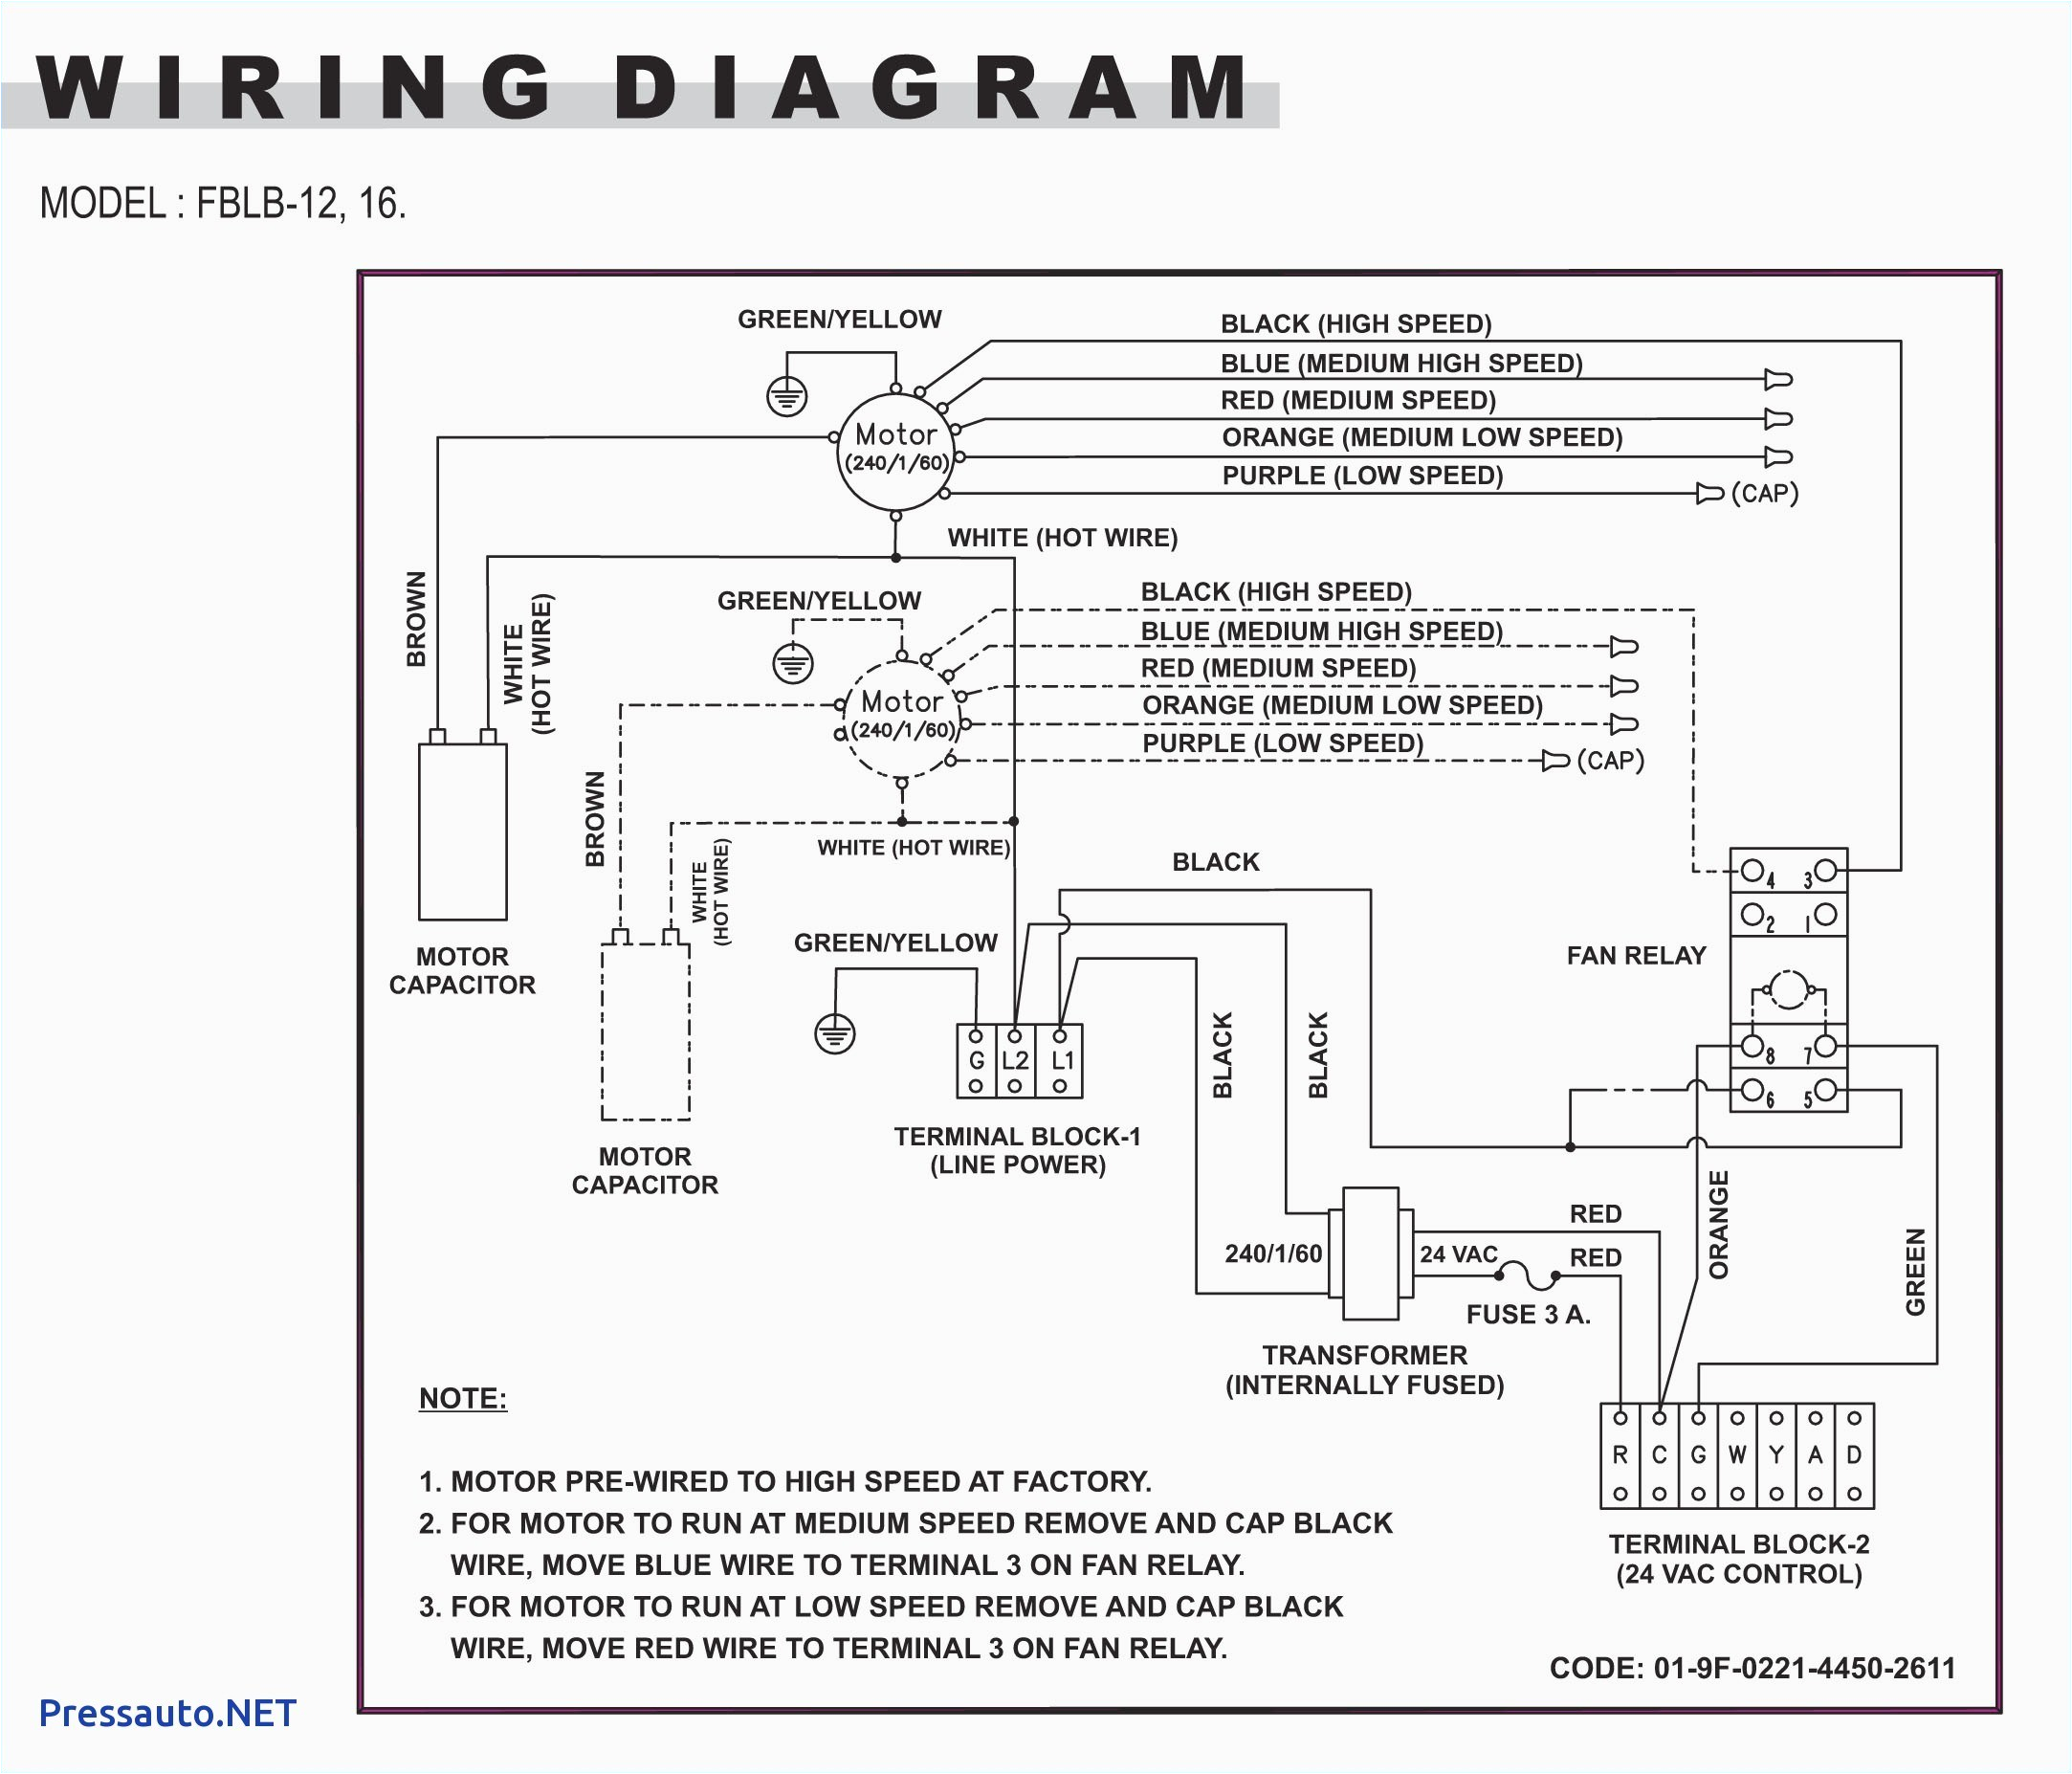 3 phase immersion heater wiring diagram collection